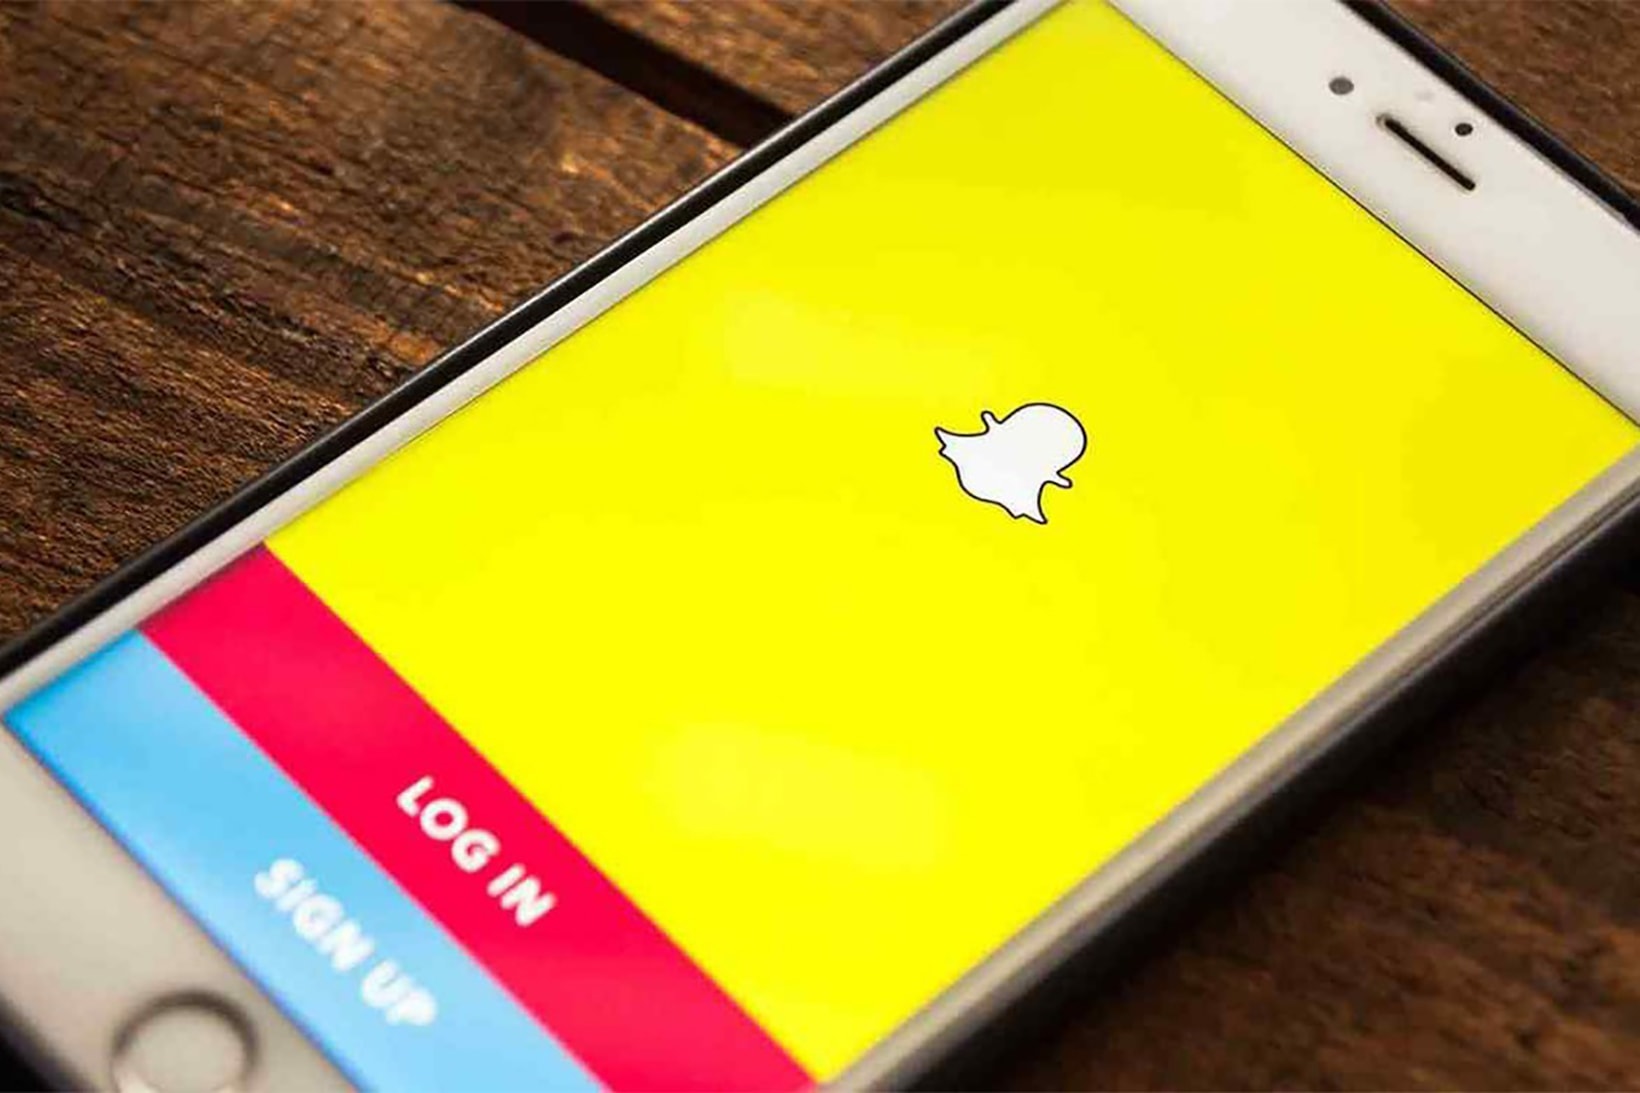 snapchat music feature apps technology phone social media